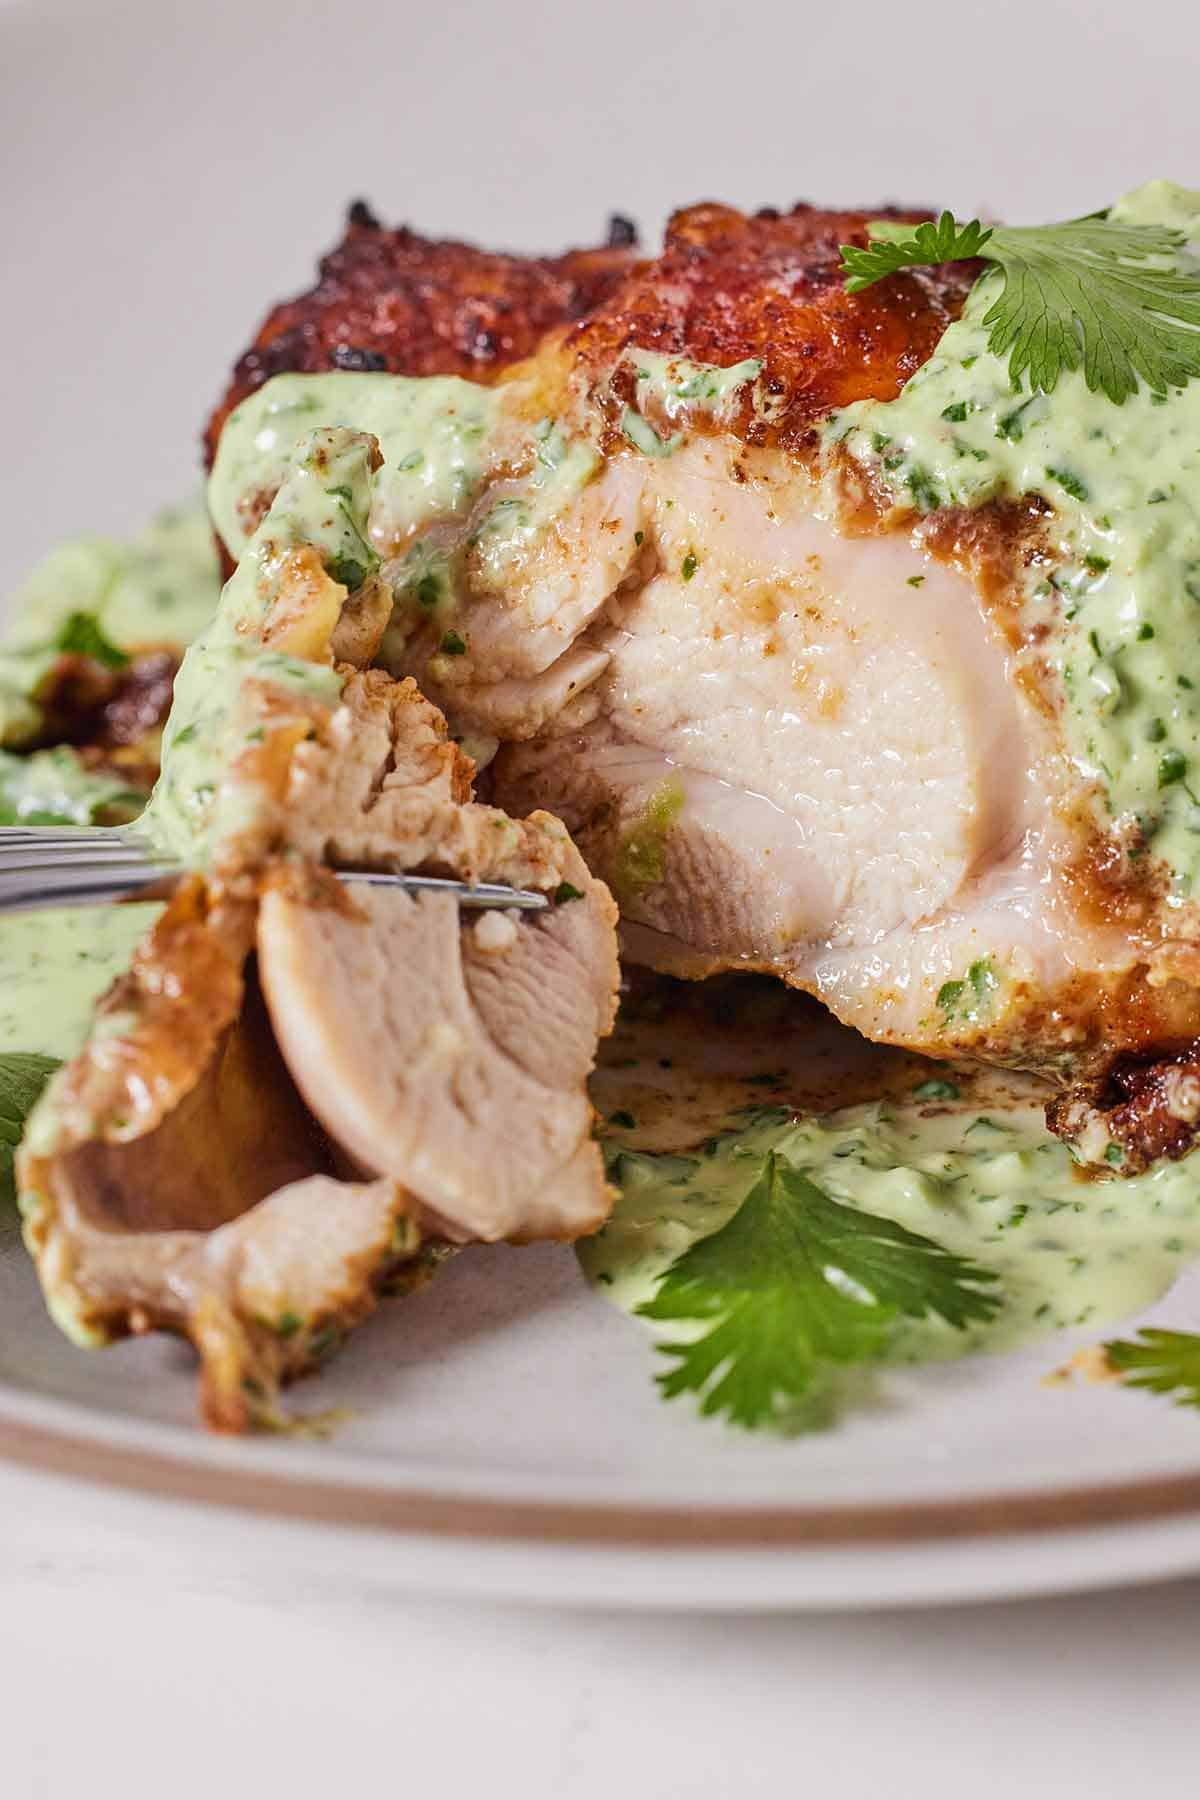 Close up of Peruvian chicken cut open with a piece on a fork, showing the moisture inside the chicken.